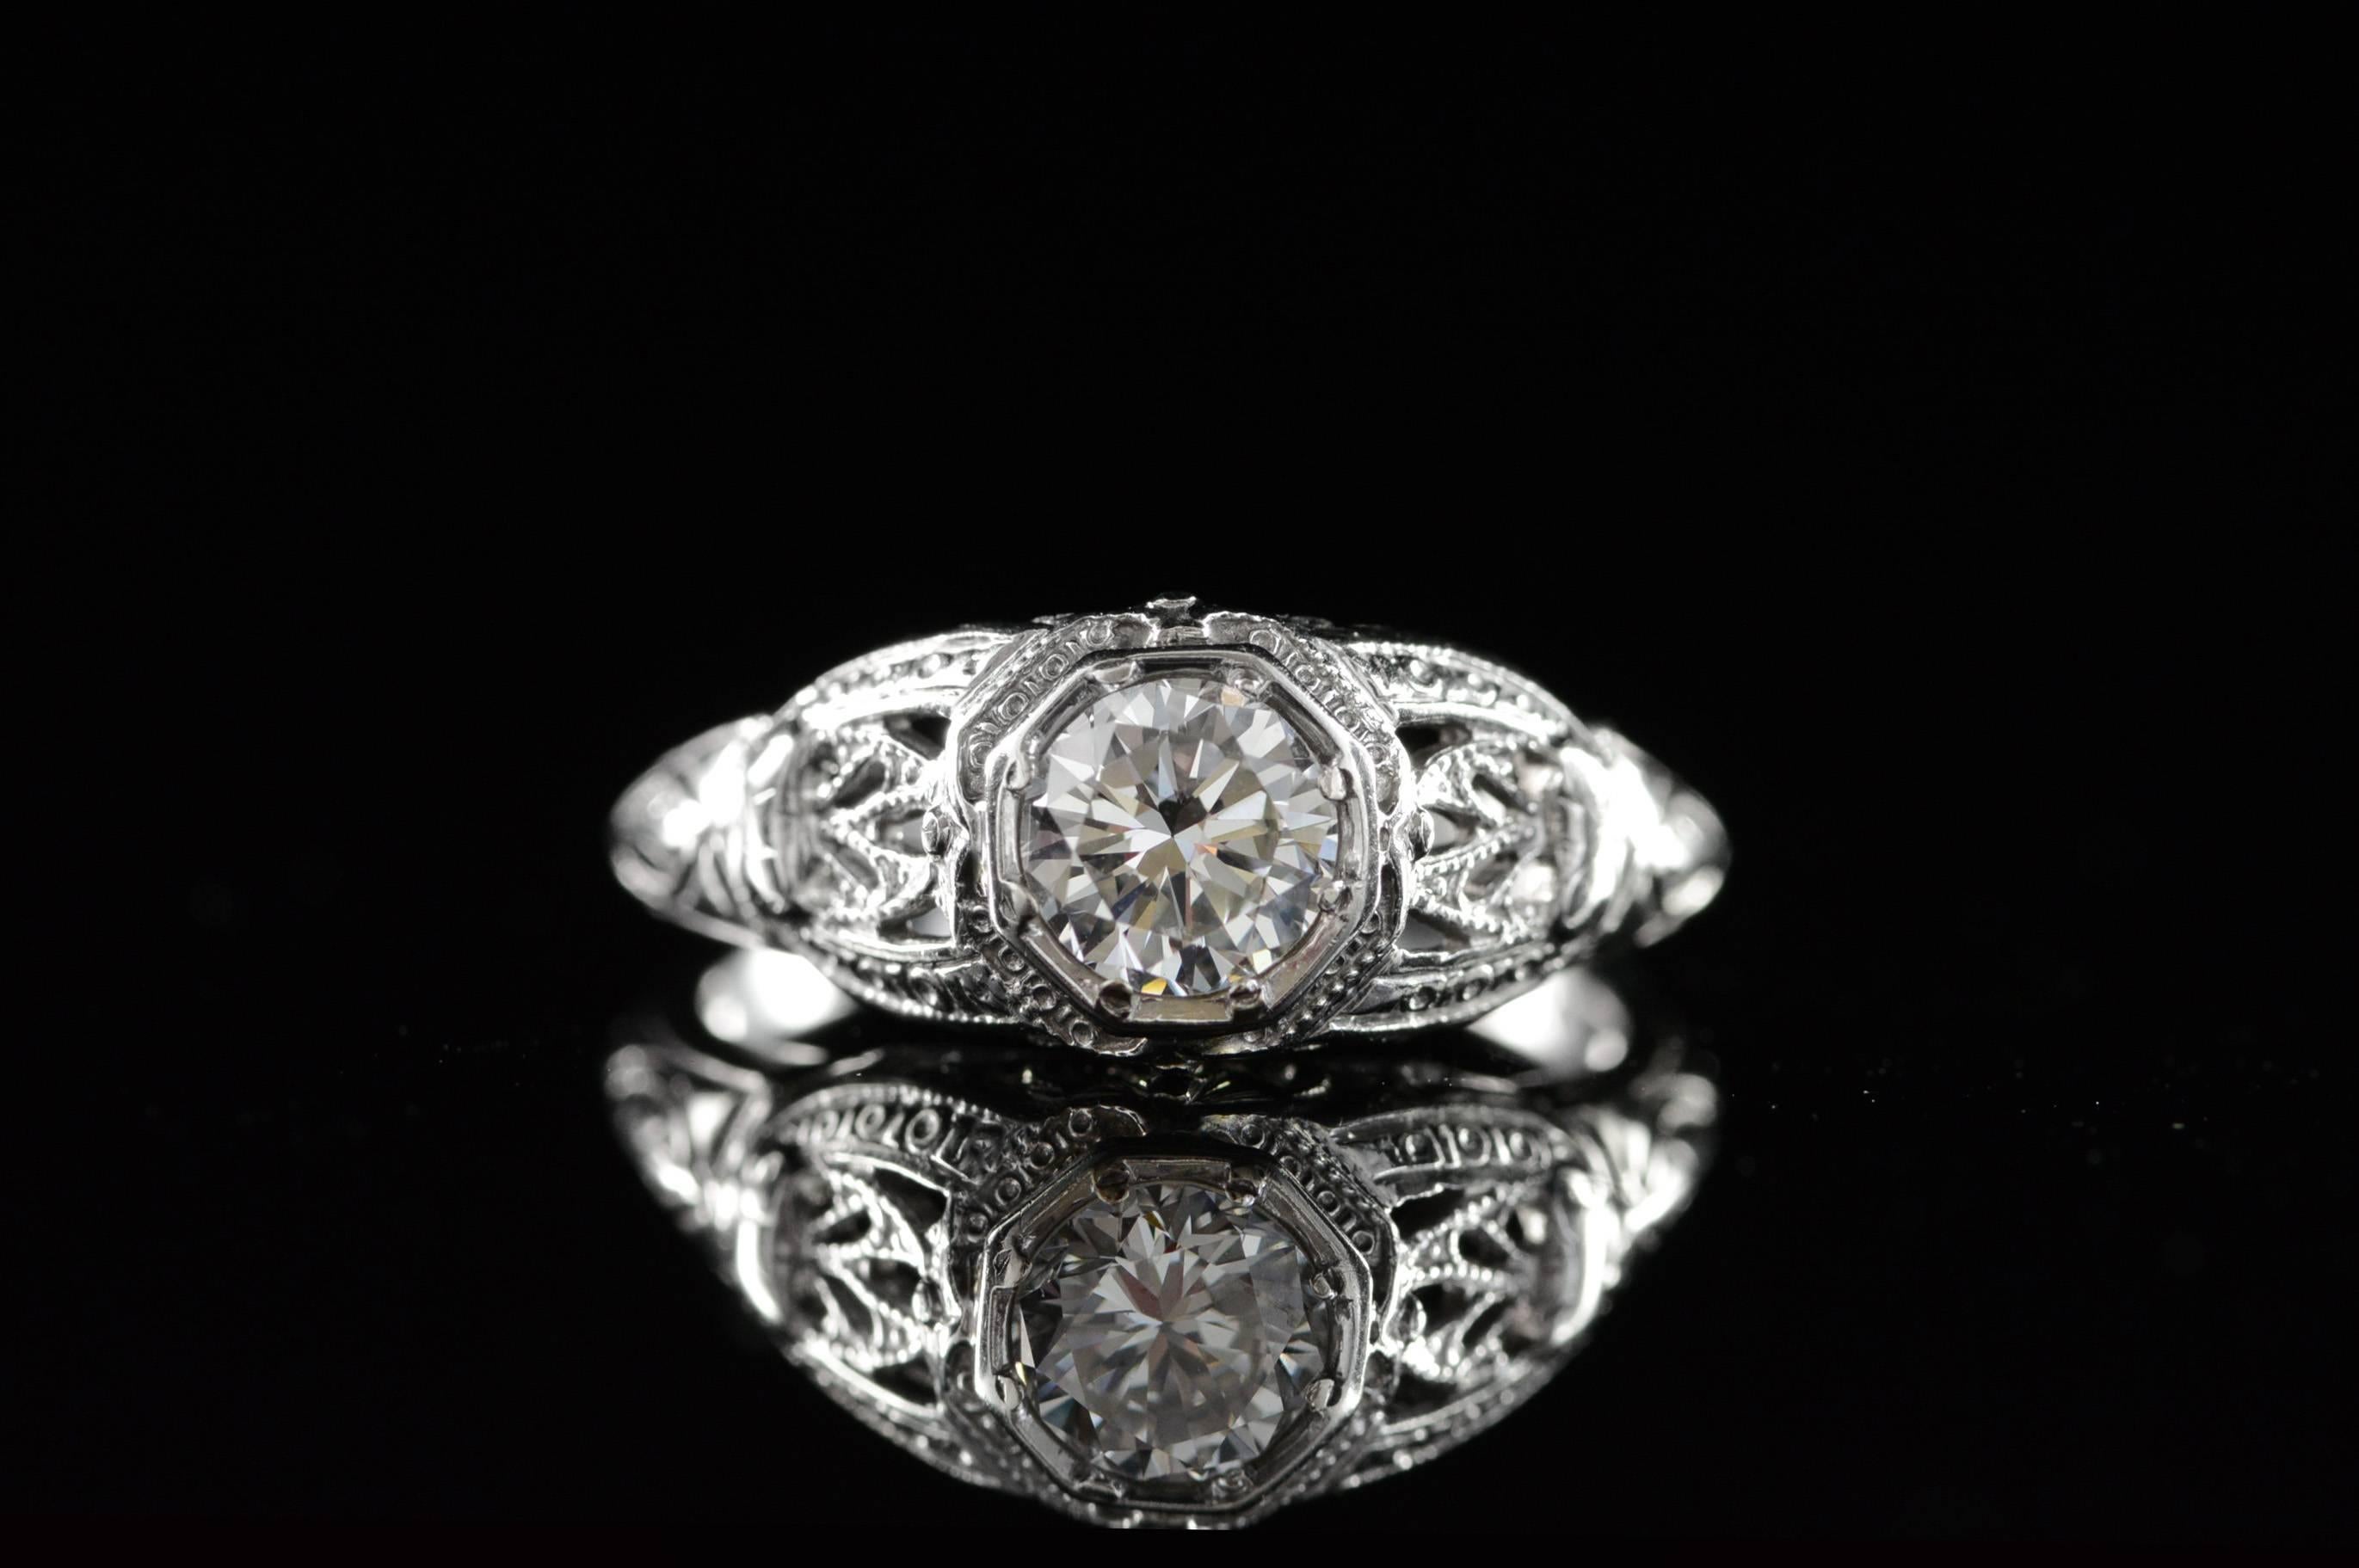 All diamonds are graded according to GIA grading standards.

·Item: 18K 0.54 CT F/VS2 Round Diamond Vintage Filigree Engagement Ring Size 4 White Gold

·Era: 1920s

·Composition: 18k Gold Marked / Tested

·Gem Stone: 0.54ct F/VS2